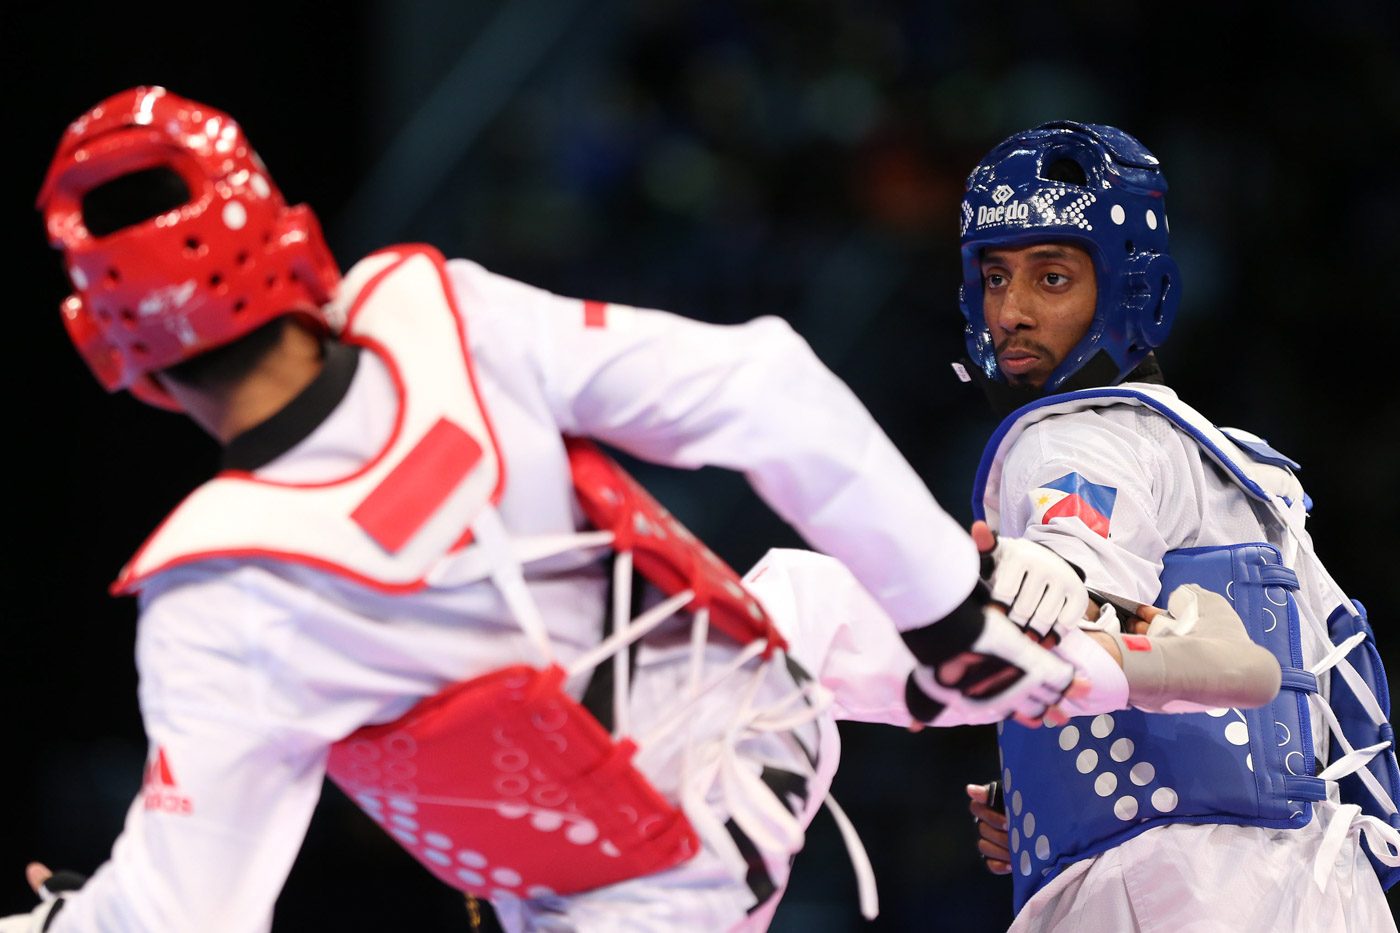 Samuel Thomas Harper Morrison of the Philippines battles Ardian Prayogo Dinggo of Indonesia in the finals of the men's -74kg of the 29th Southeast Asian Games taekwondo competition. Morrisson prevailed to win the gold medal. Photo from PSC-POC Media 